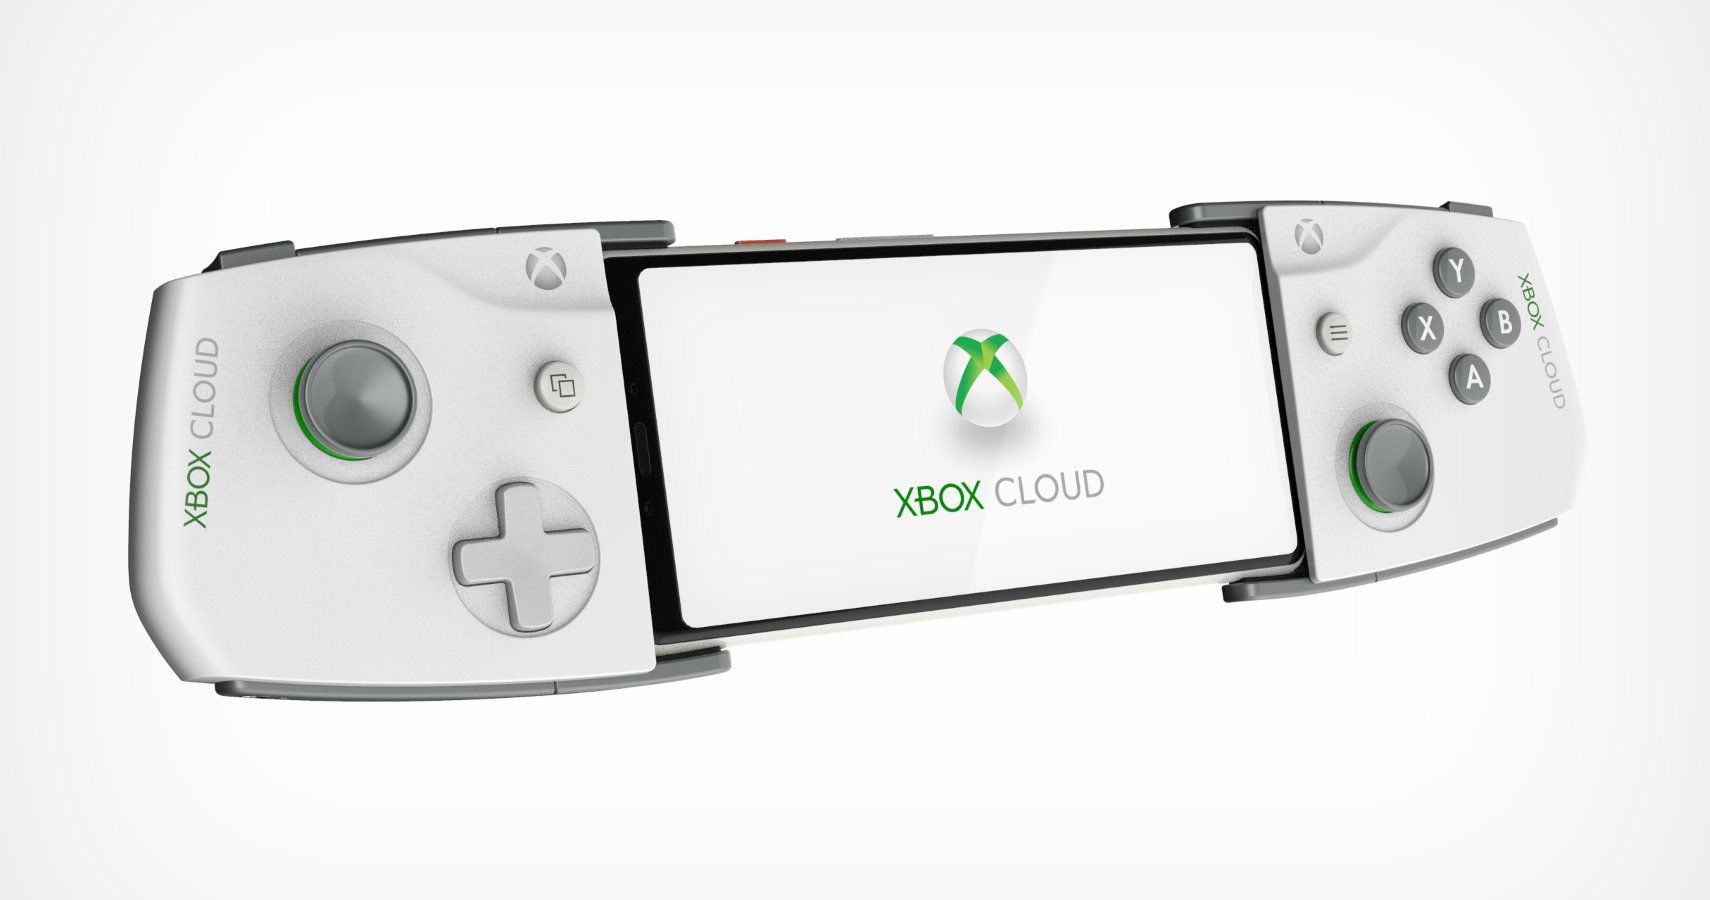 In-depth: How Microsoft could build an empire of mobile Xbox